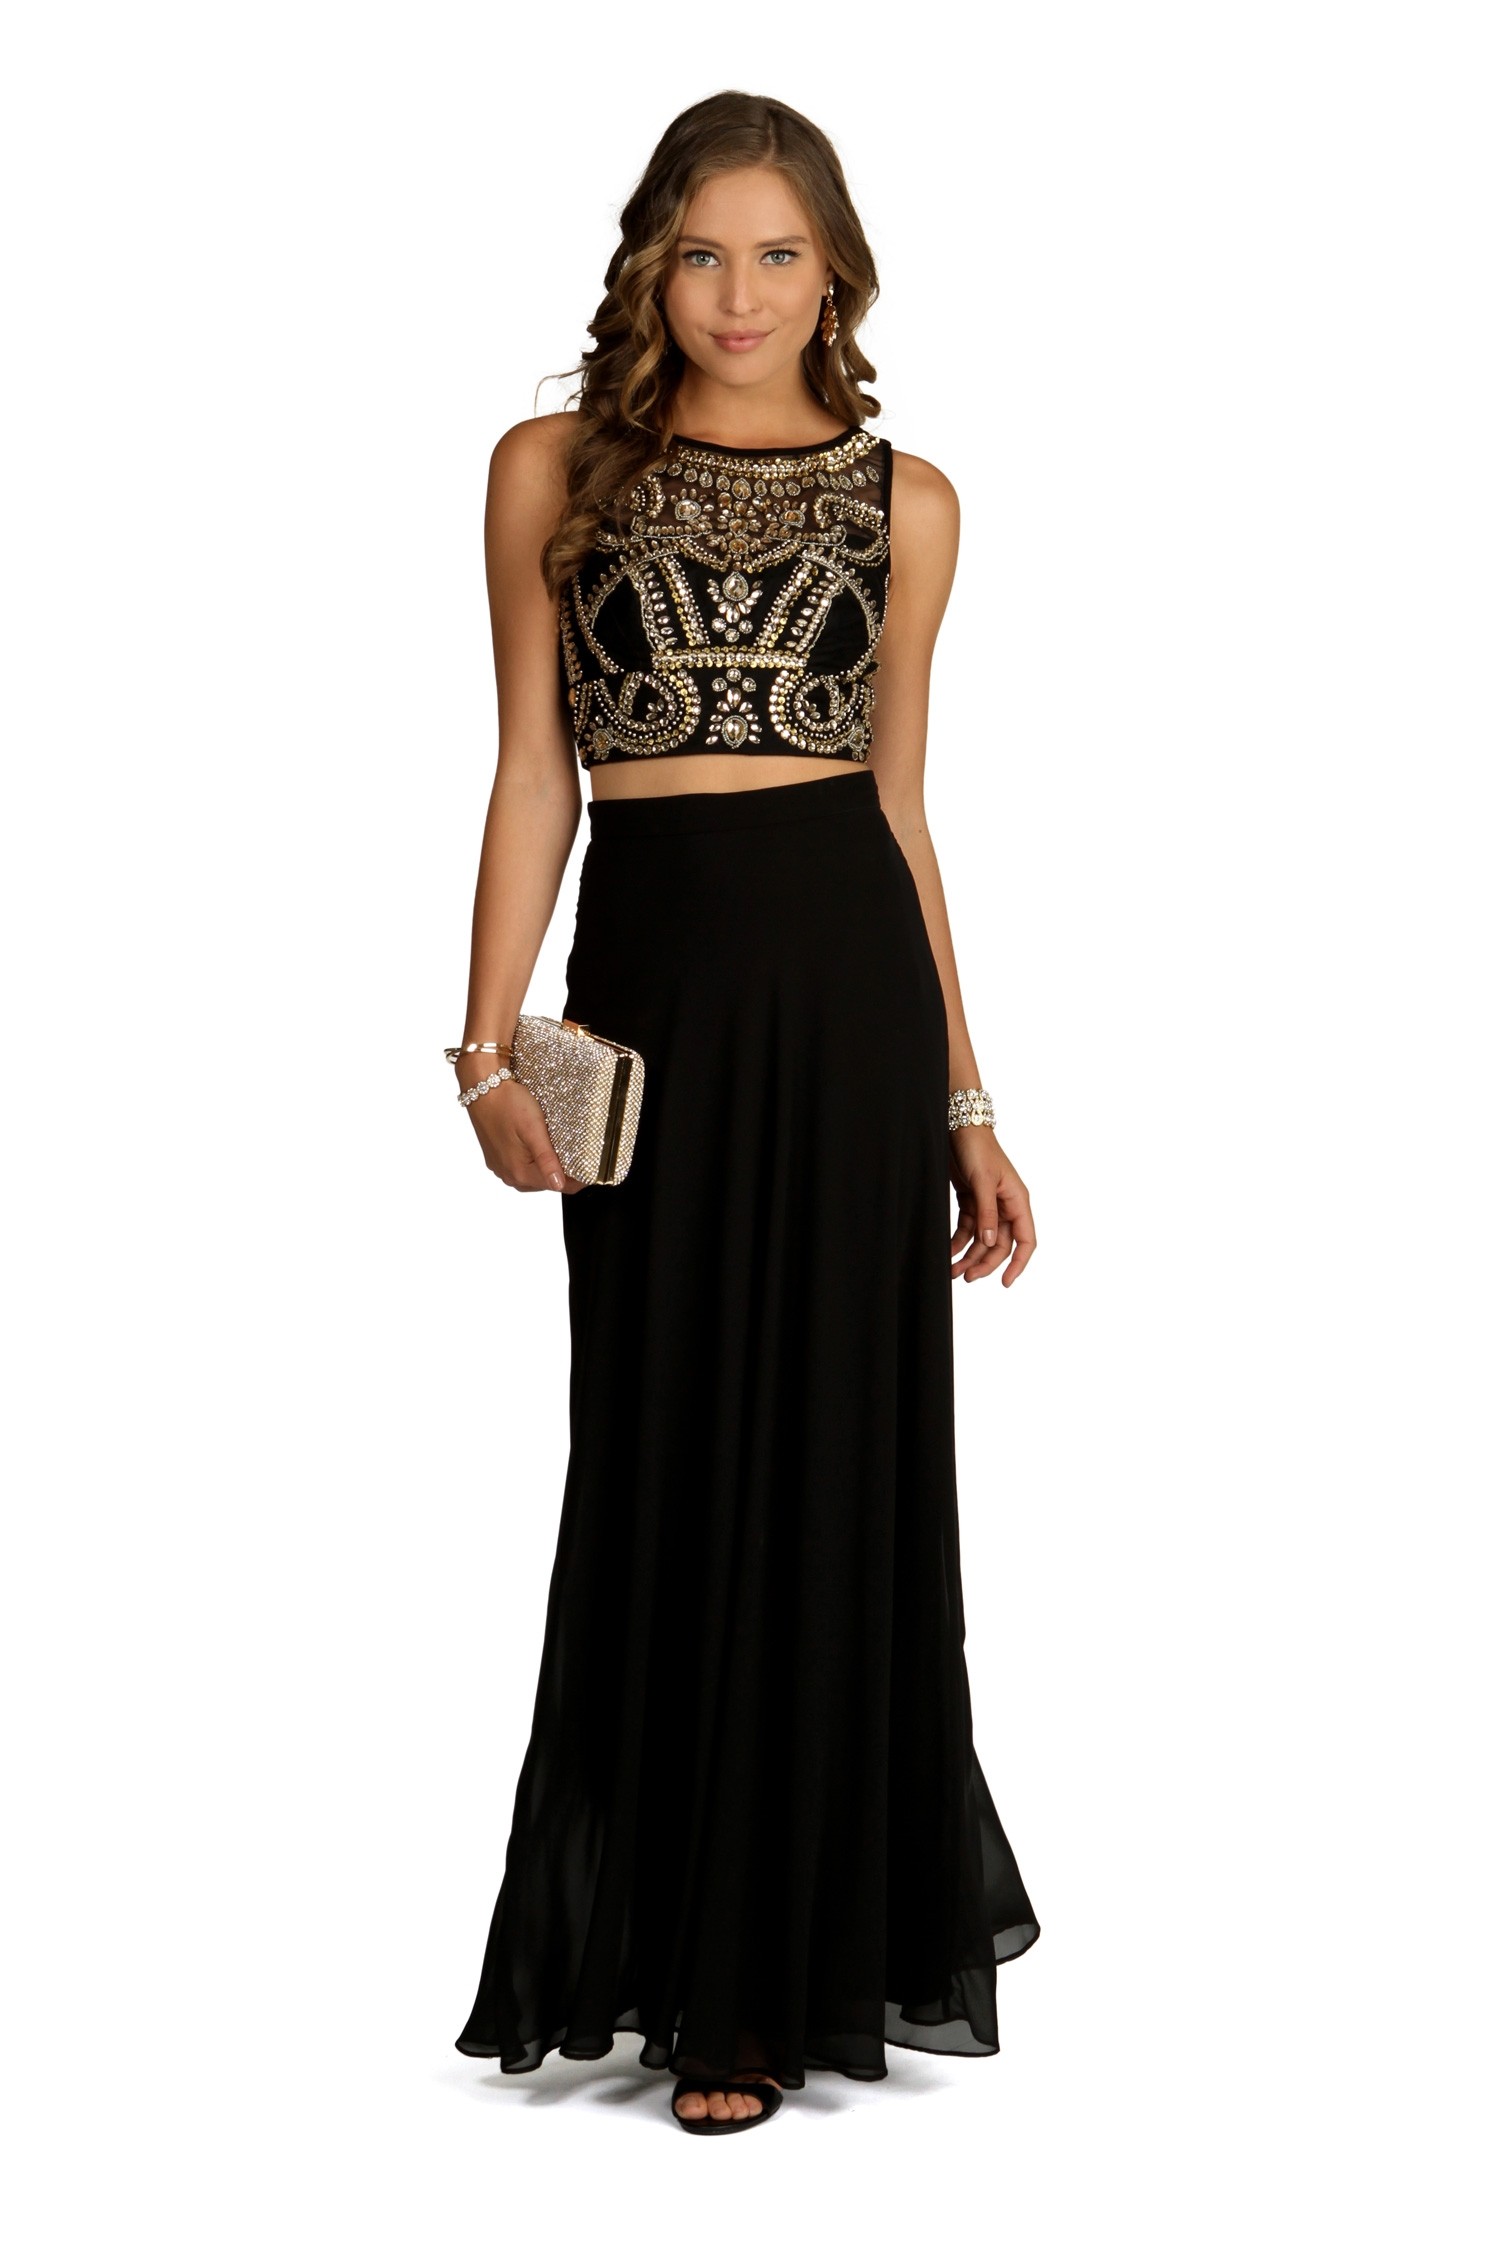 Why you can never go wrong with a
black  prom dress